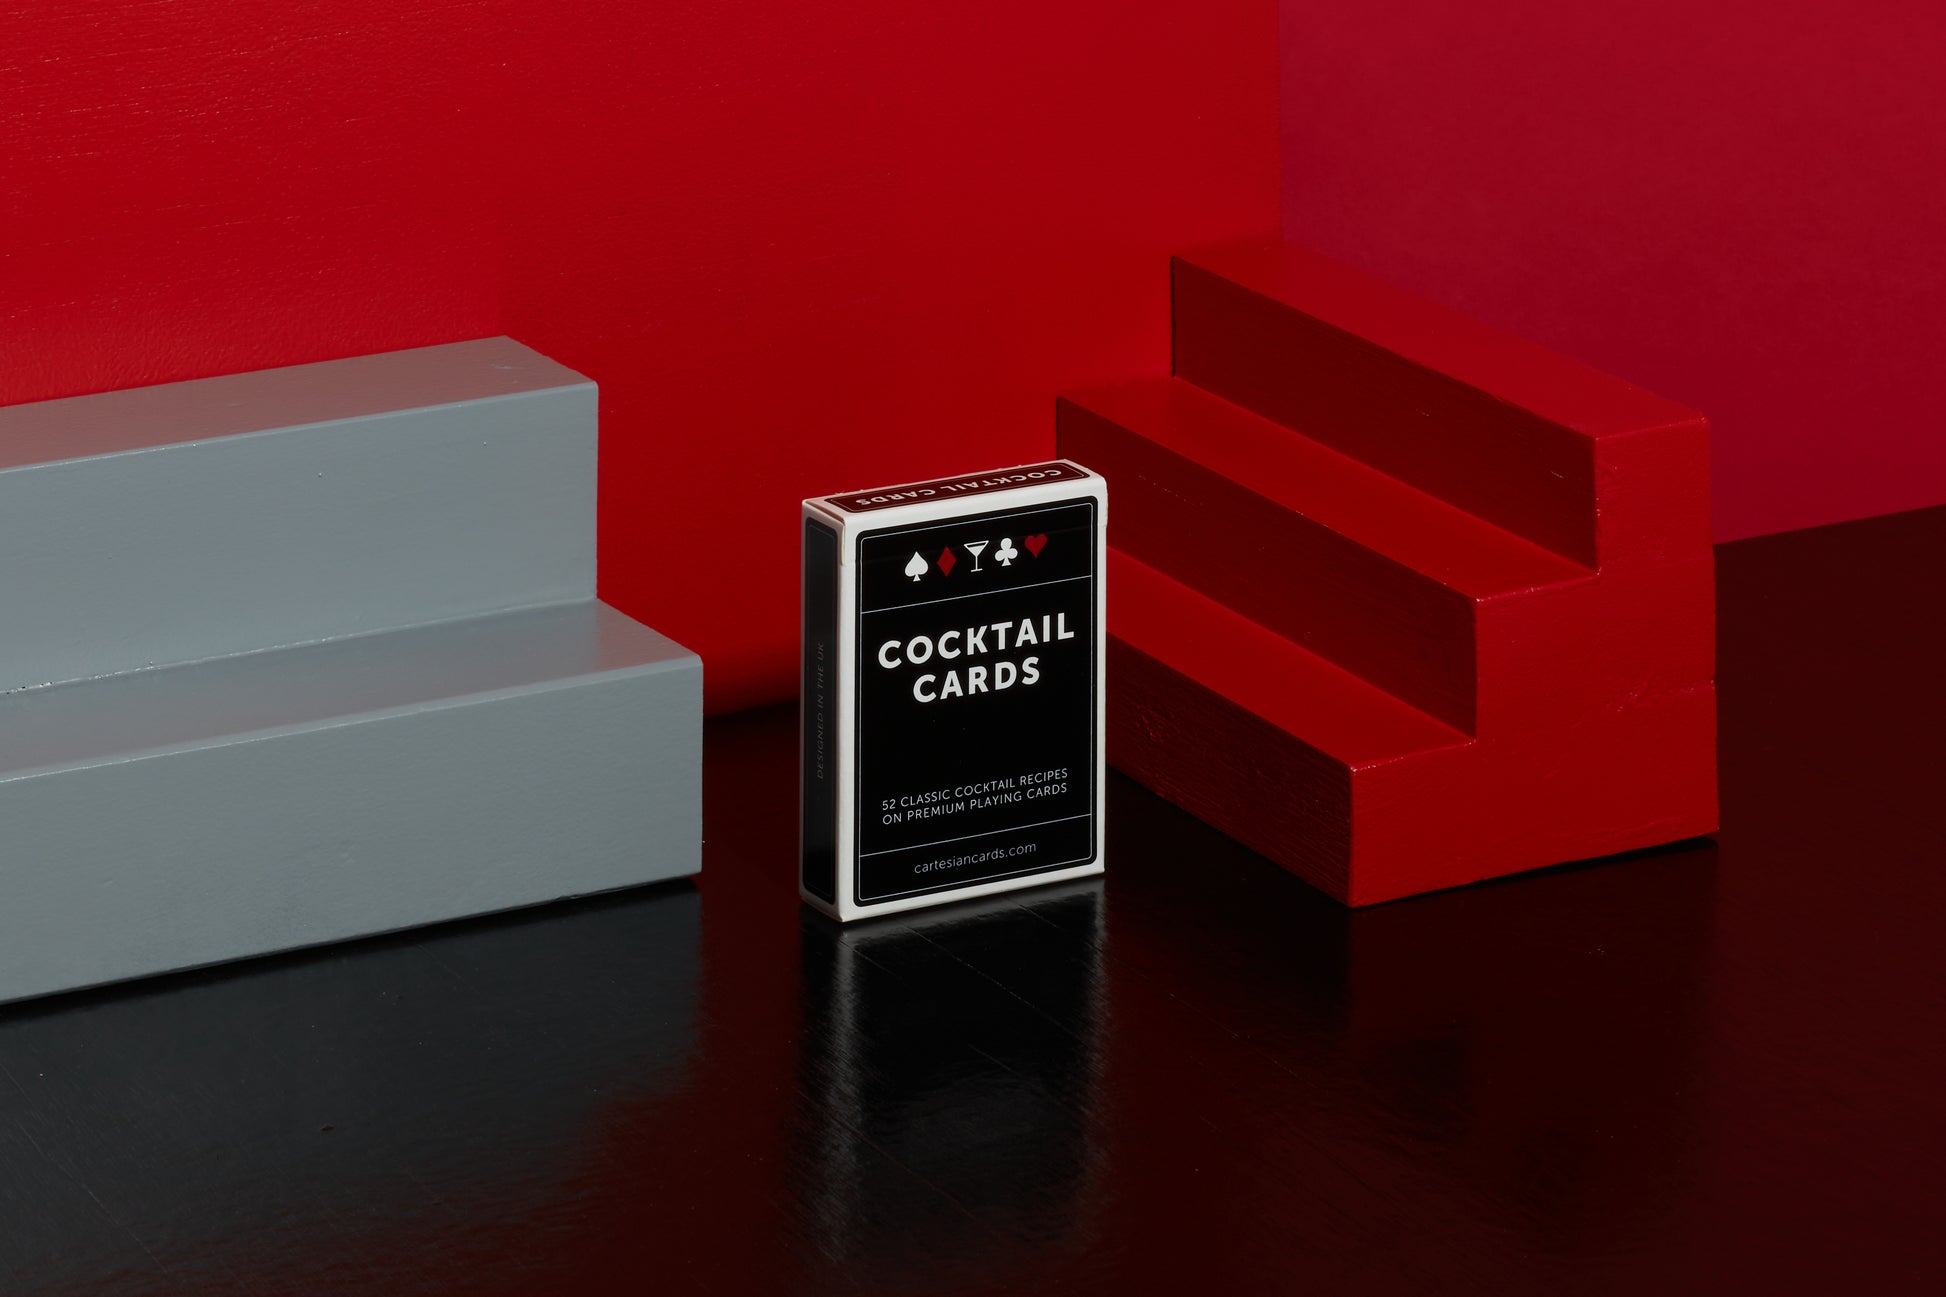 Stylised image of a deck of Cocktail Cards with red geometric objects